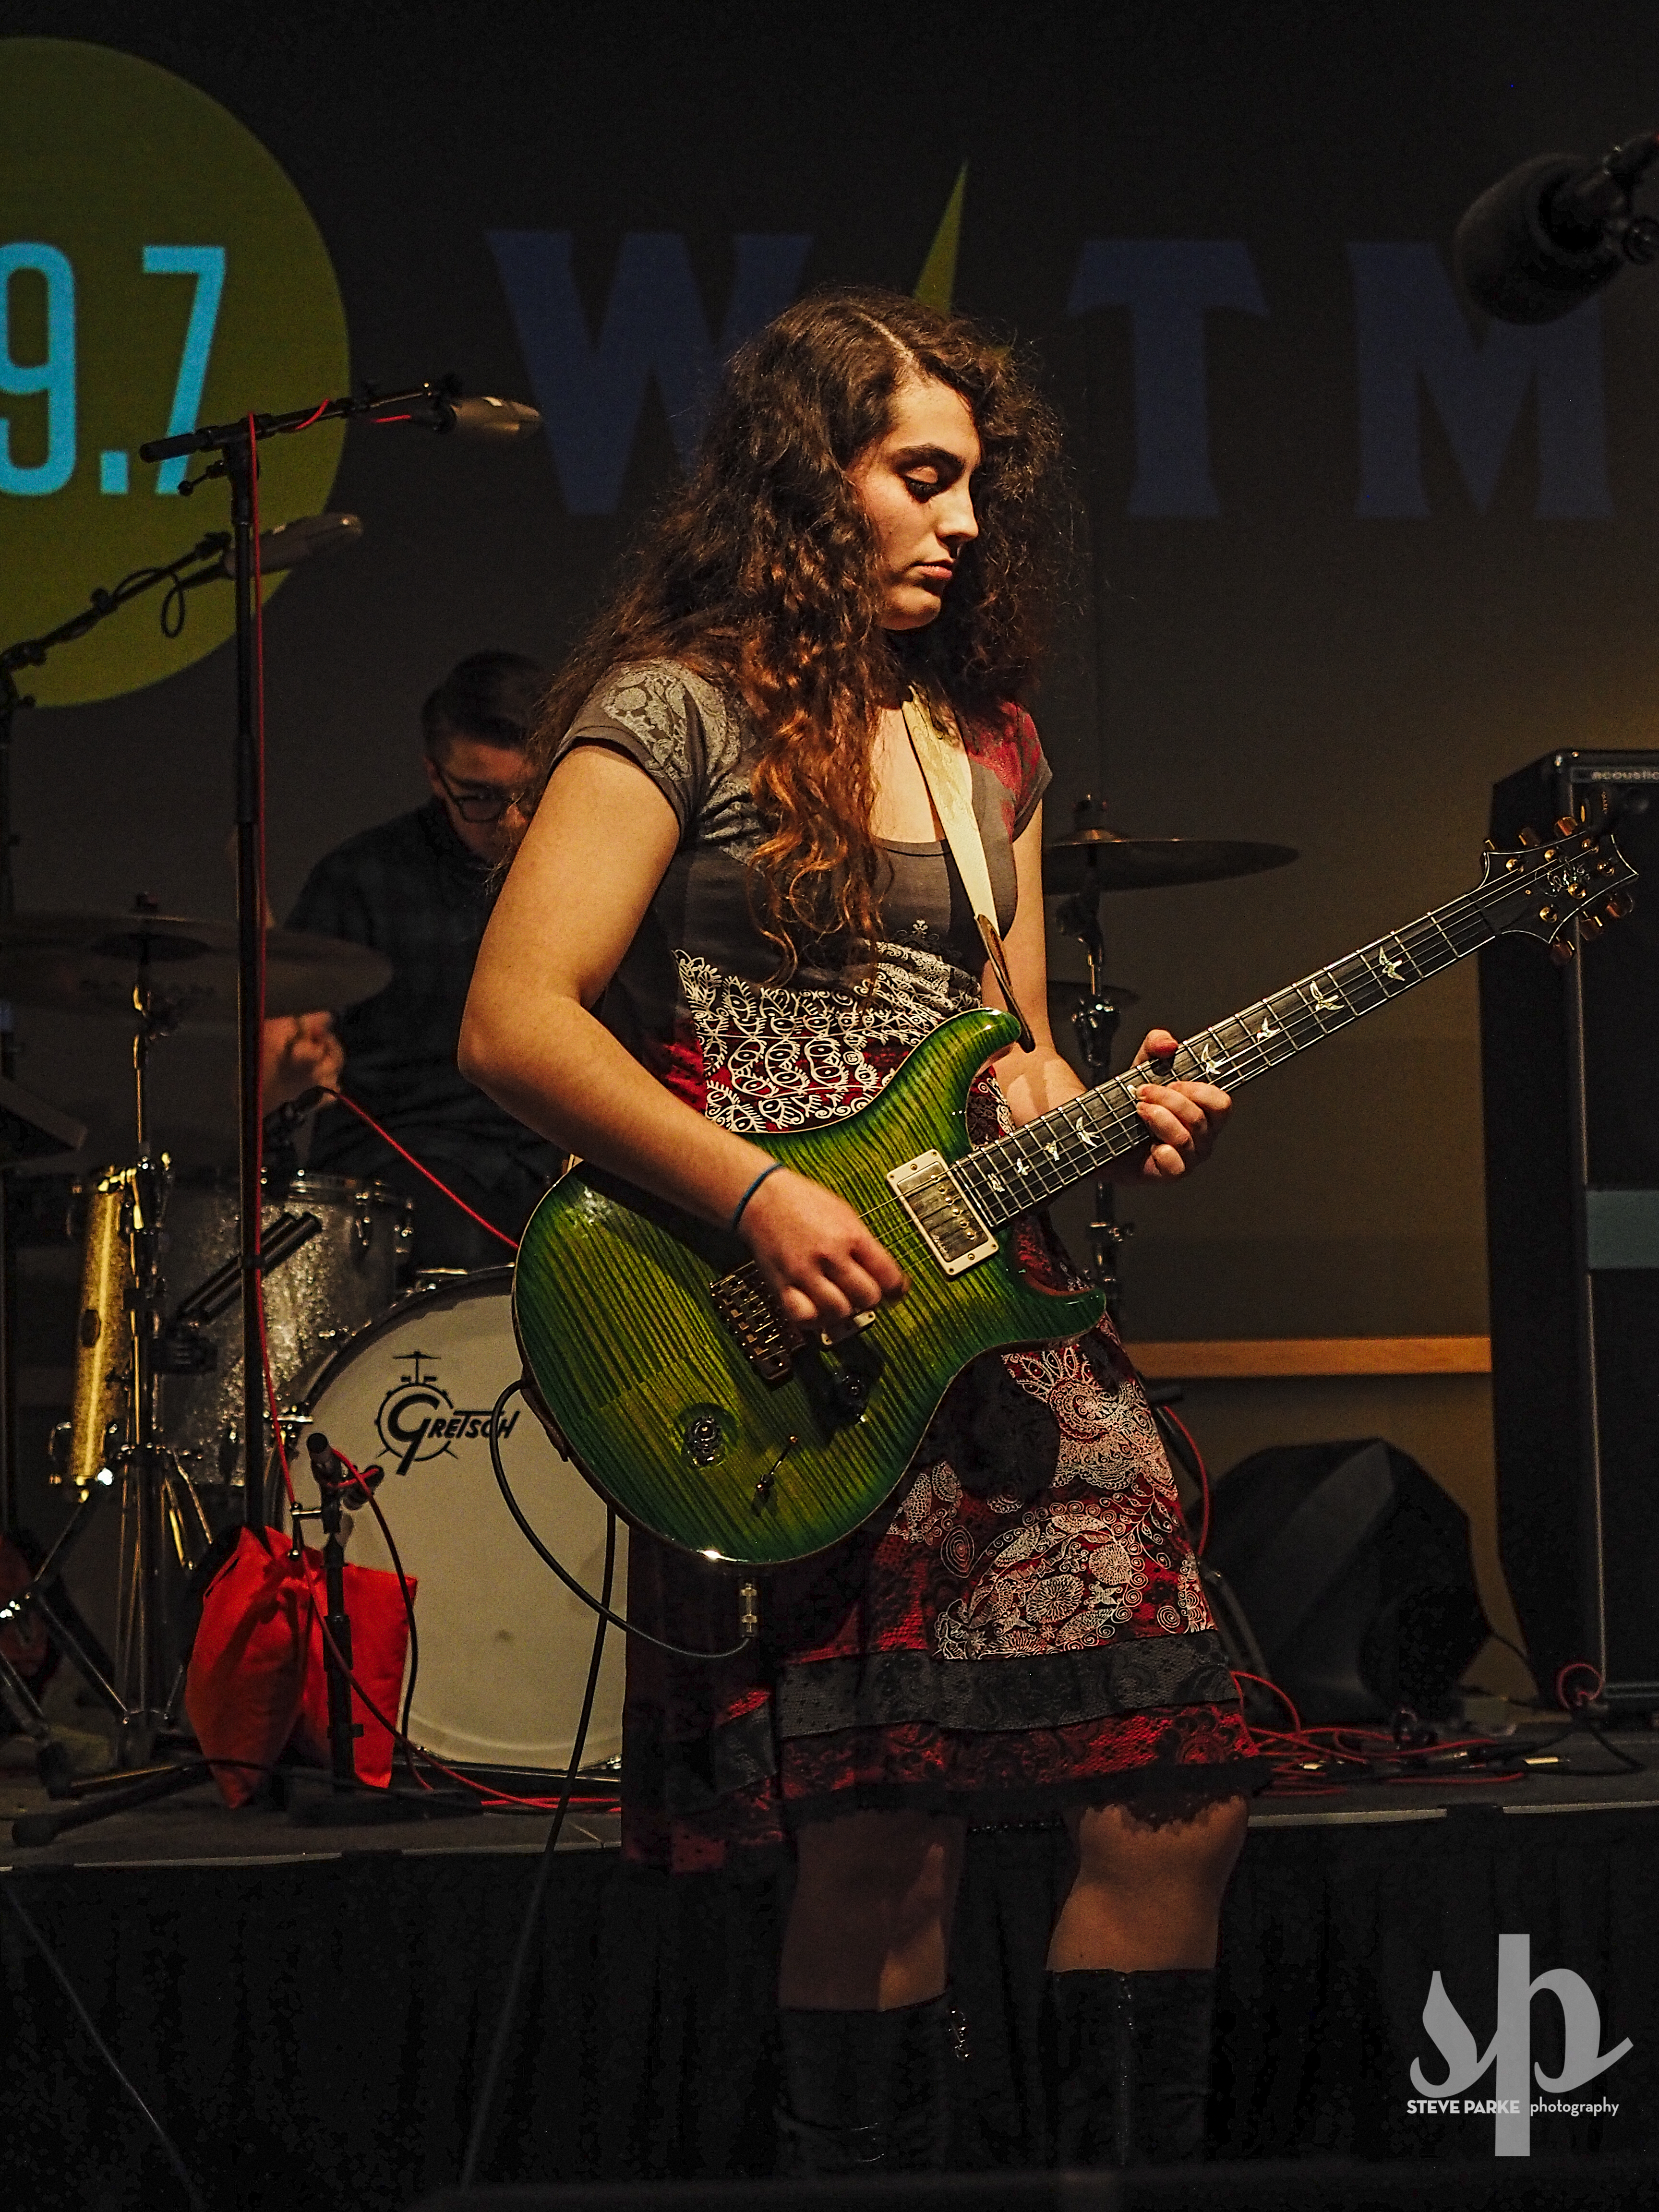 Serena Miller, guitarist and singer for Legends of Et cetera, performs at An Evening With Legends of Et cetera at WTMD. Photo by Steve Parke.